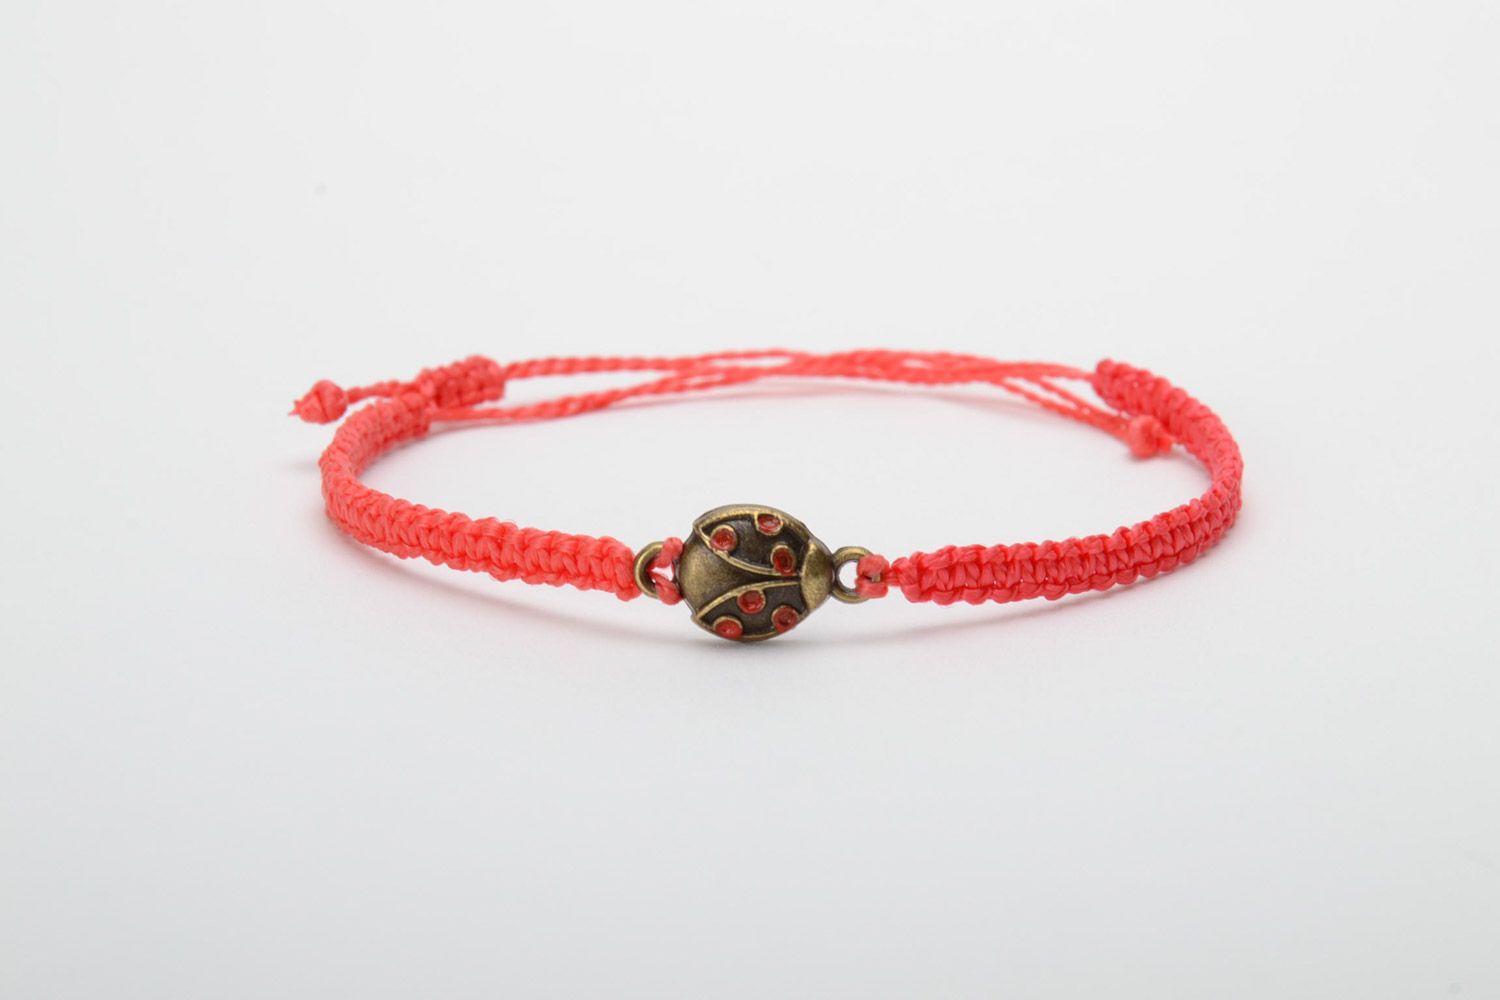 Handmade women's macrame woven cord bracelet of red color with charm photo 5